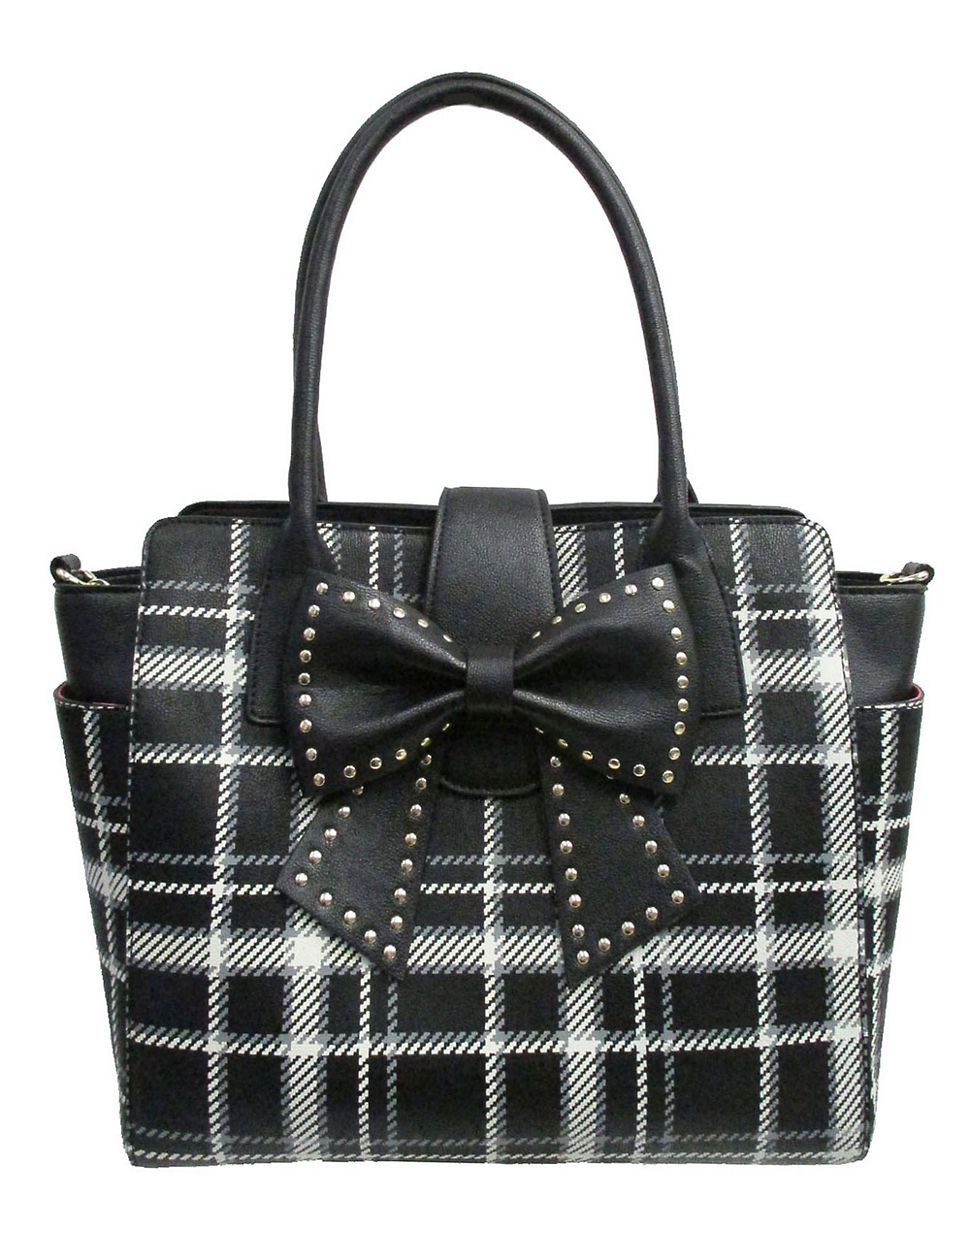 Lyst - Betsey Johnson Sincerely Yours Studded Bow Tote Bag in Black